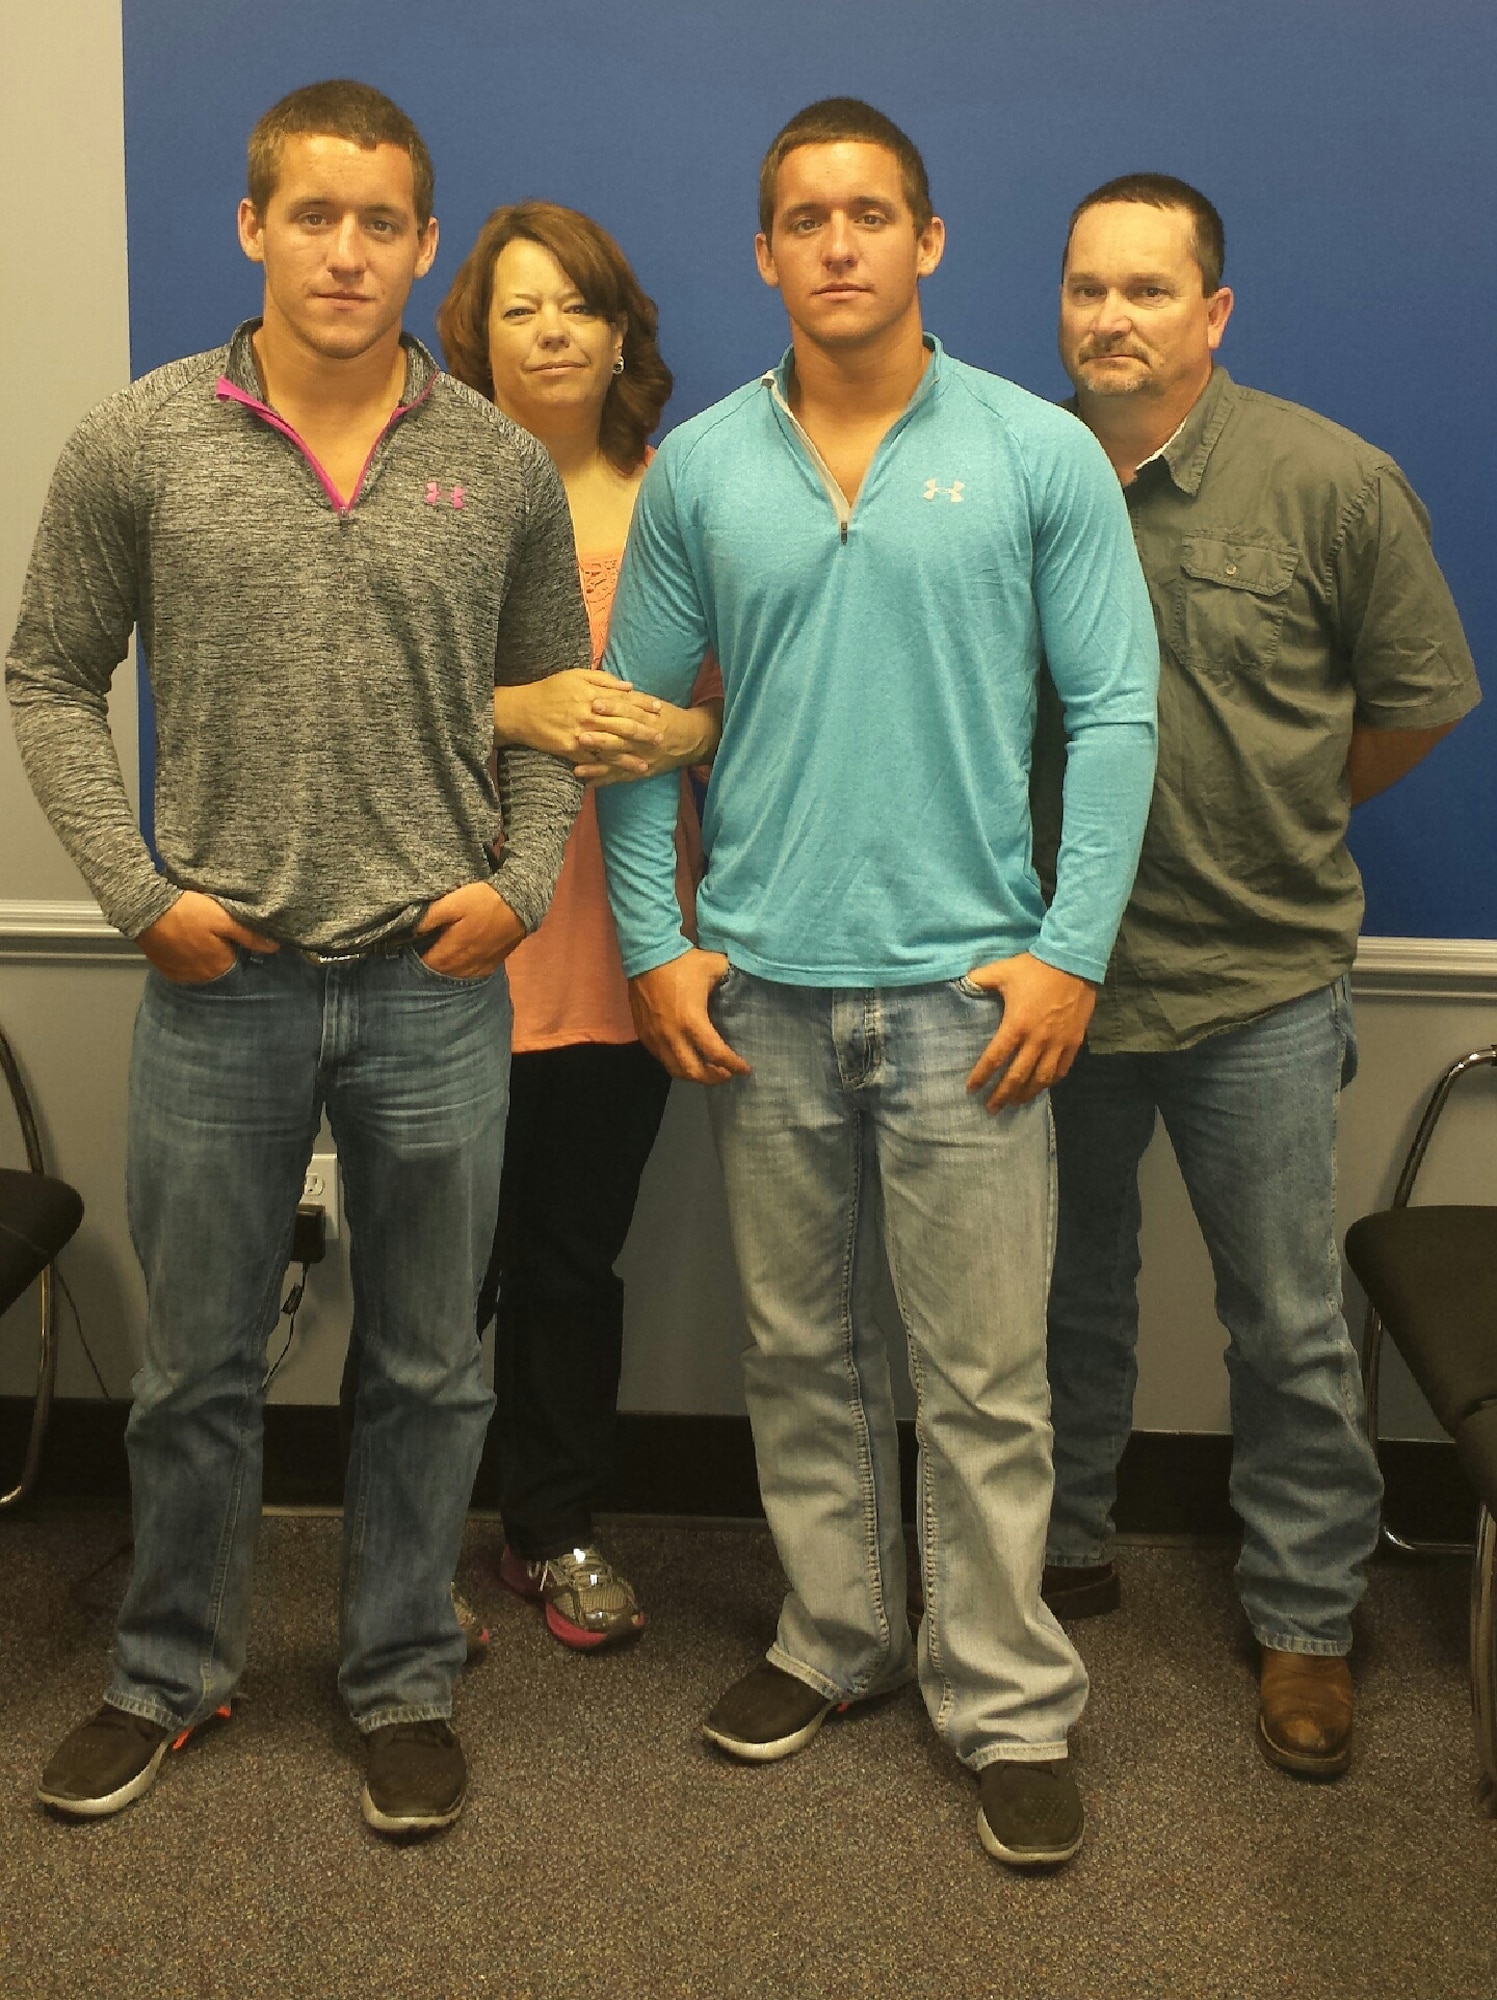 Twin brothers Dustin (in gray) and Dillon Yancy pose with their parents, James and Tonya Yancy, at the recruiting office in Memphis, Tenn. (Courtesy photo)